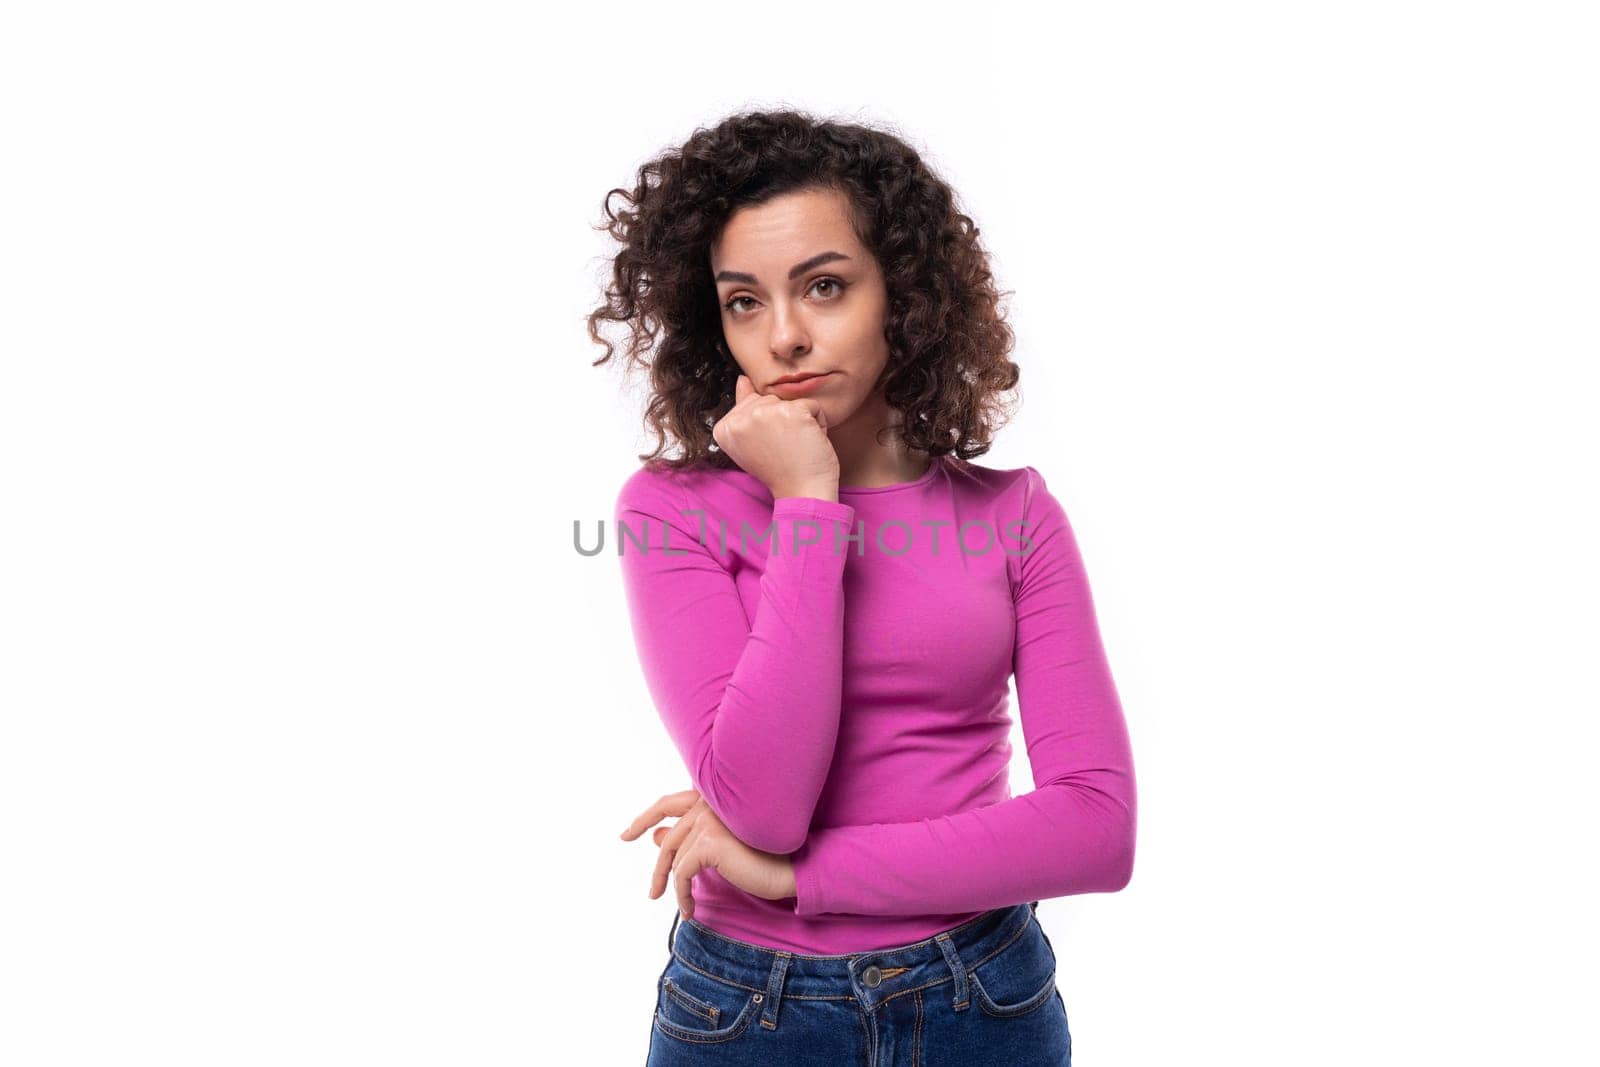 young smiling woman with curly well-groomed hair on a white background by TRMK